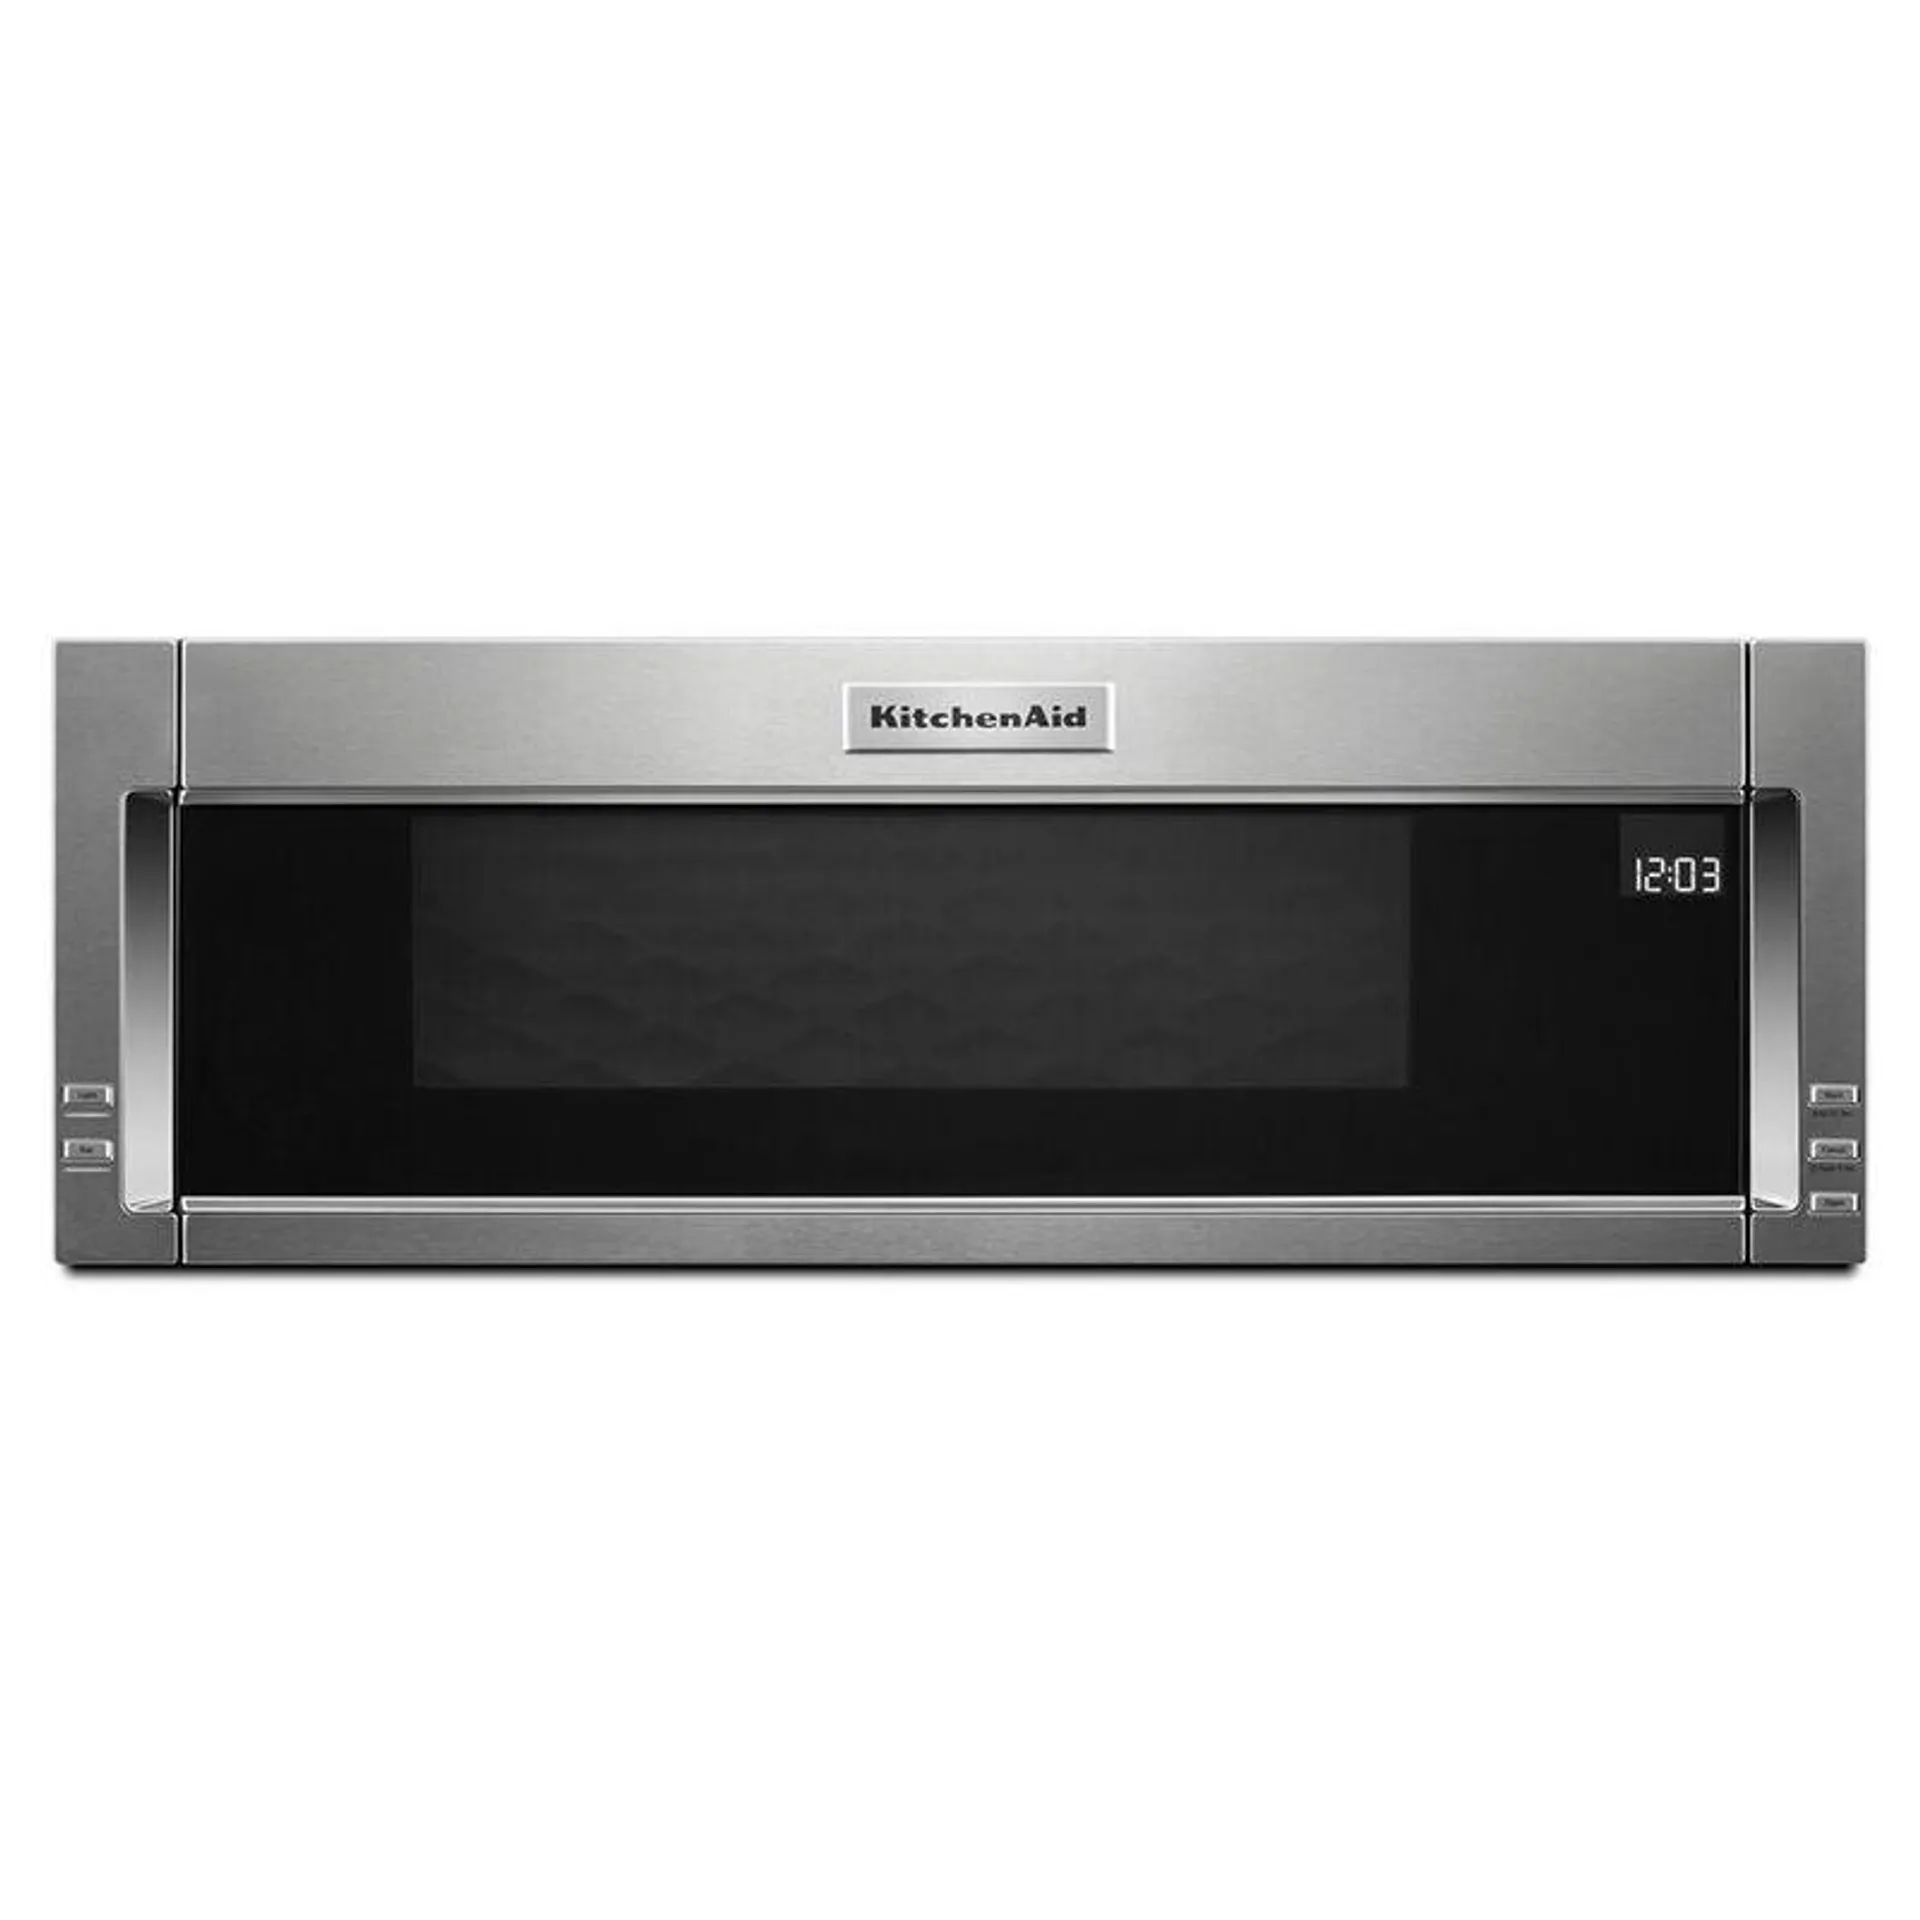 KitchenAid 30" 1.1 Cu. Ft. Over-the-Range Microwave with 10 Power Levels, 500 CFM & Sensor Cooking Controls - Stainless Steel